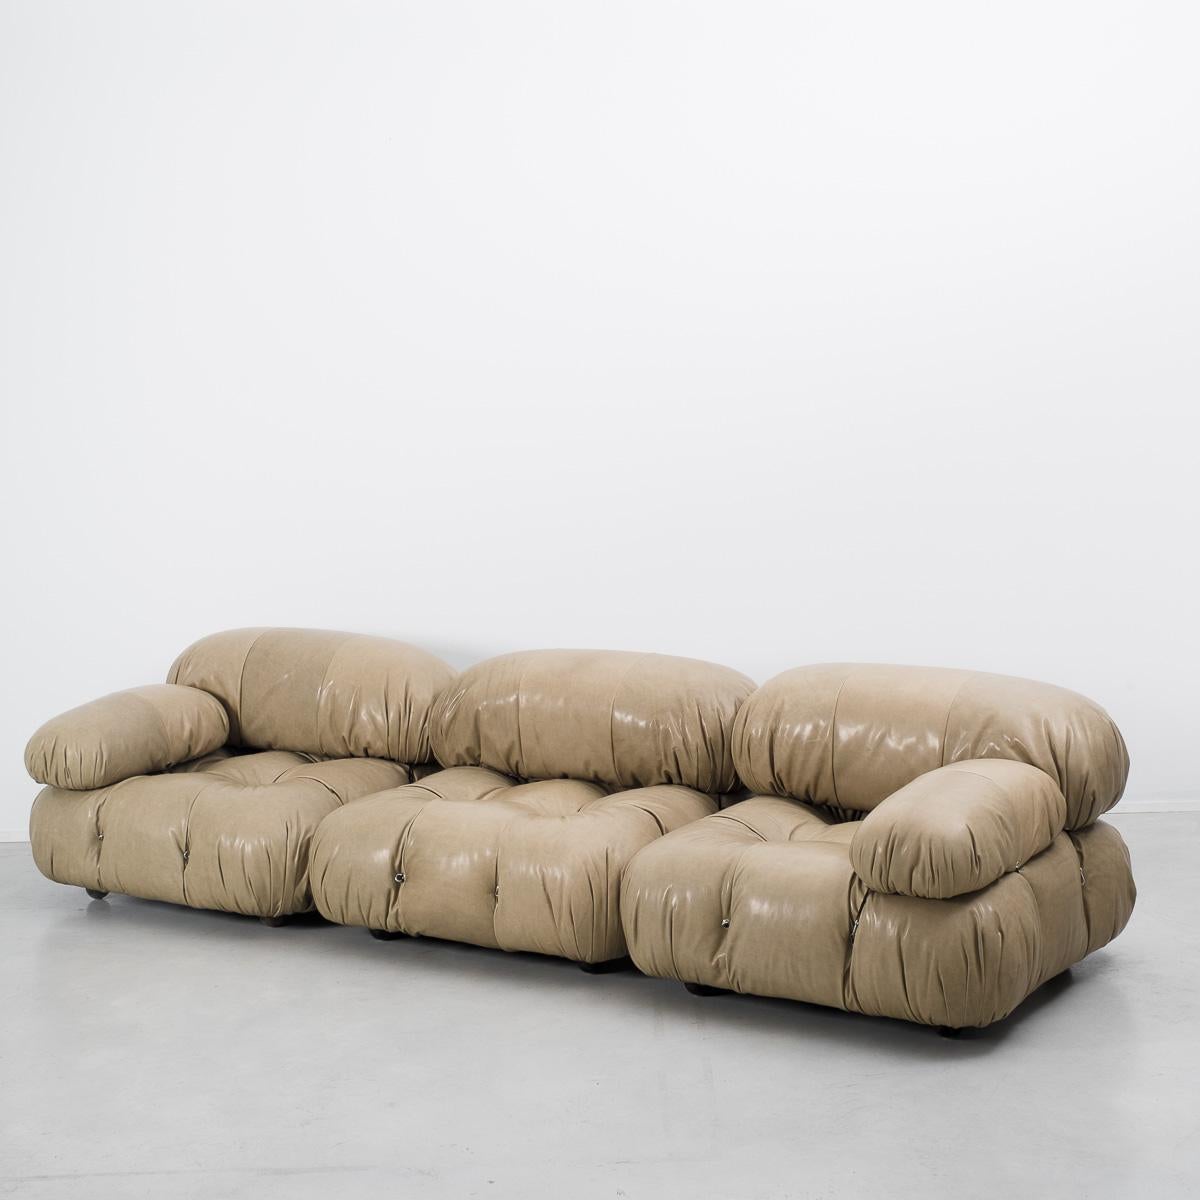 The Camaleonda modular sofa was designed by Italian architect Mario Bellini in 1971, and first manufactured first by C&B and later B&B Italia. It epitomizes low slung seventies comfort.

It comes with four base pieces, three back pieces and two